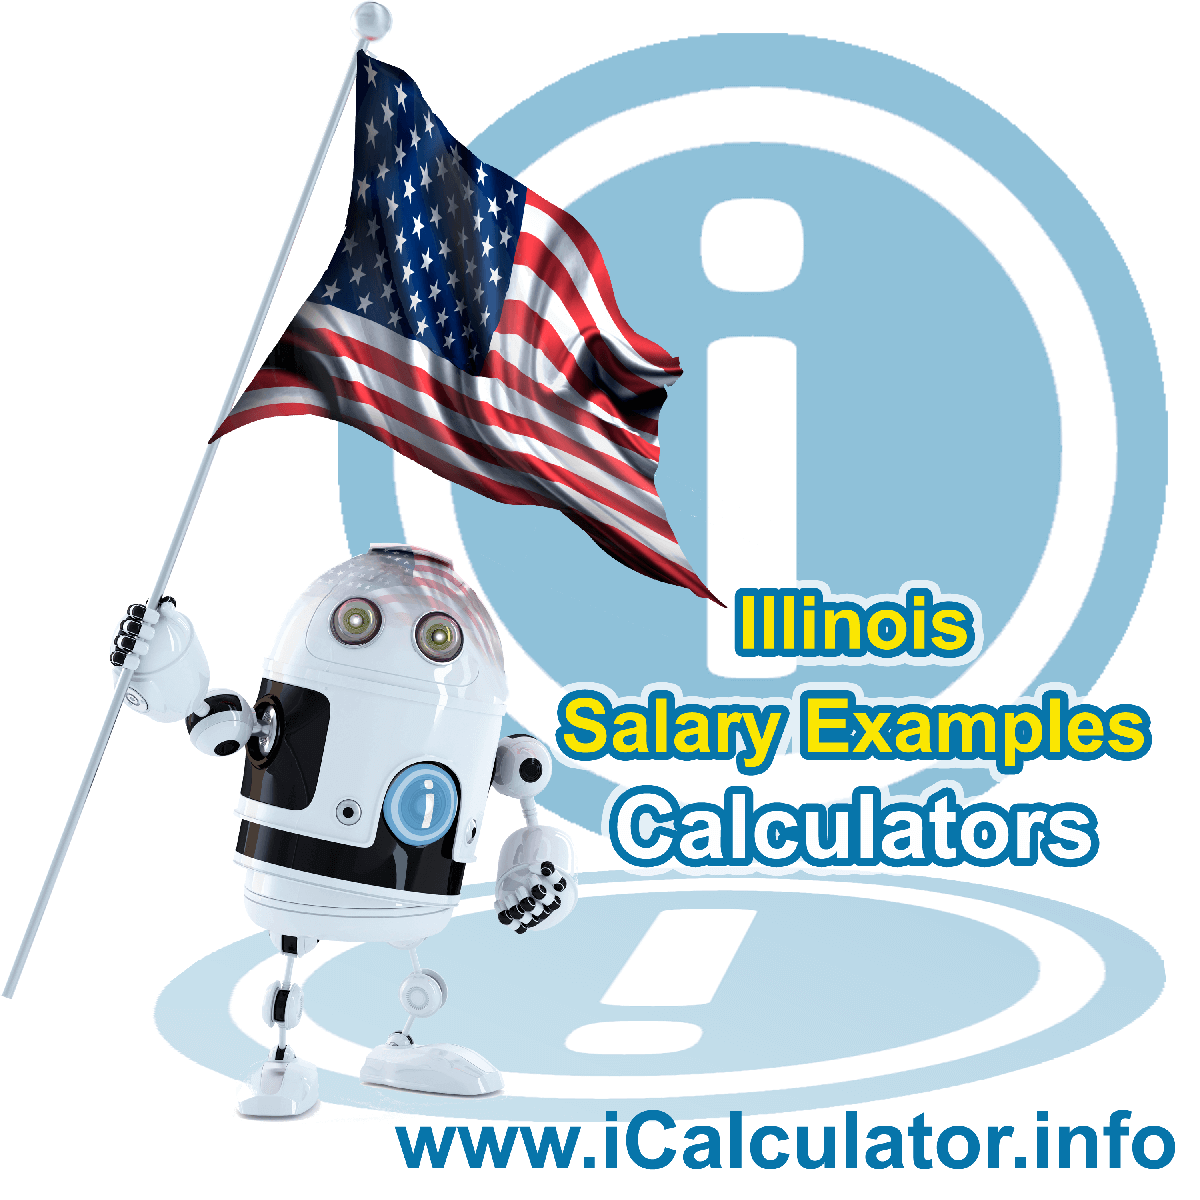 Illinois Salary Example for $ 220,000.00 in 2023 | iCalculator™ | $ 220,000.00 salary example for employee and employer paying Illinois State tincome taxes. Detailed salary after tax calculation including Illinois State Tax, Federal State Tax, Medicare Deductions, Social Security, Capital Gains and other income tax and salary deductions complete with supporting Illinois state tax tables 